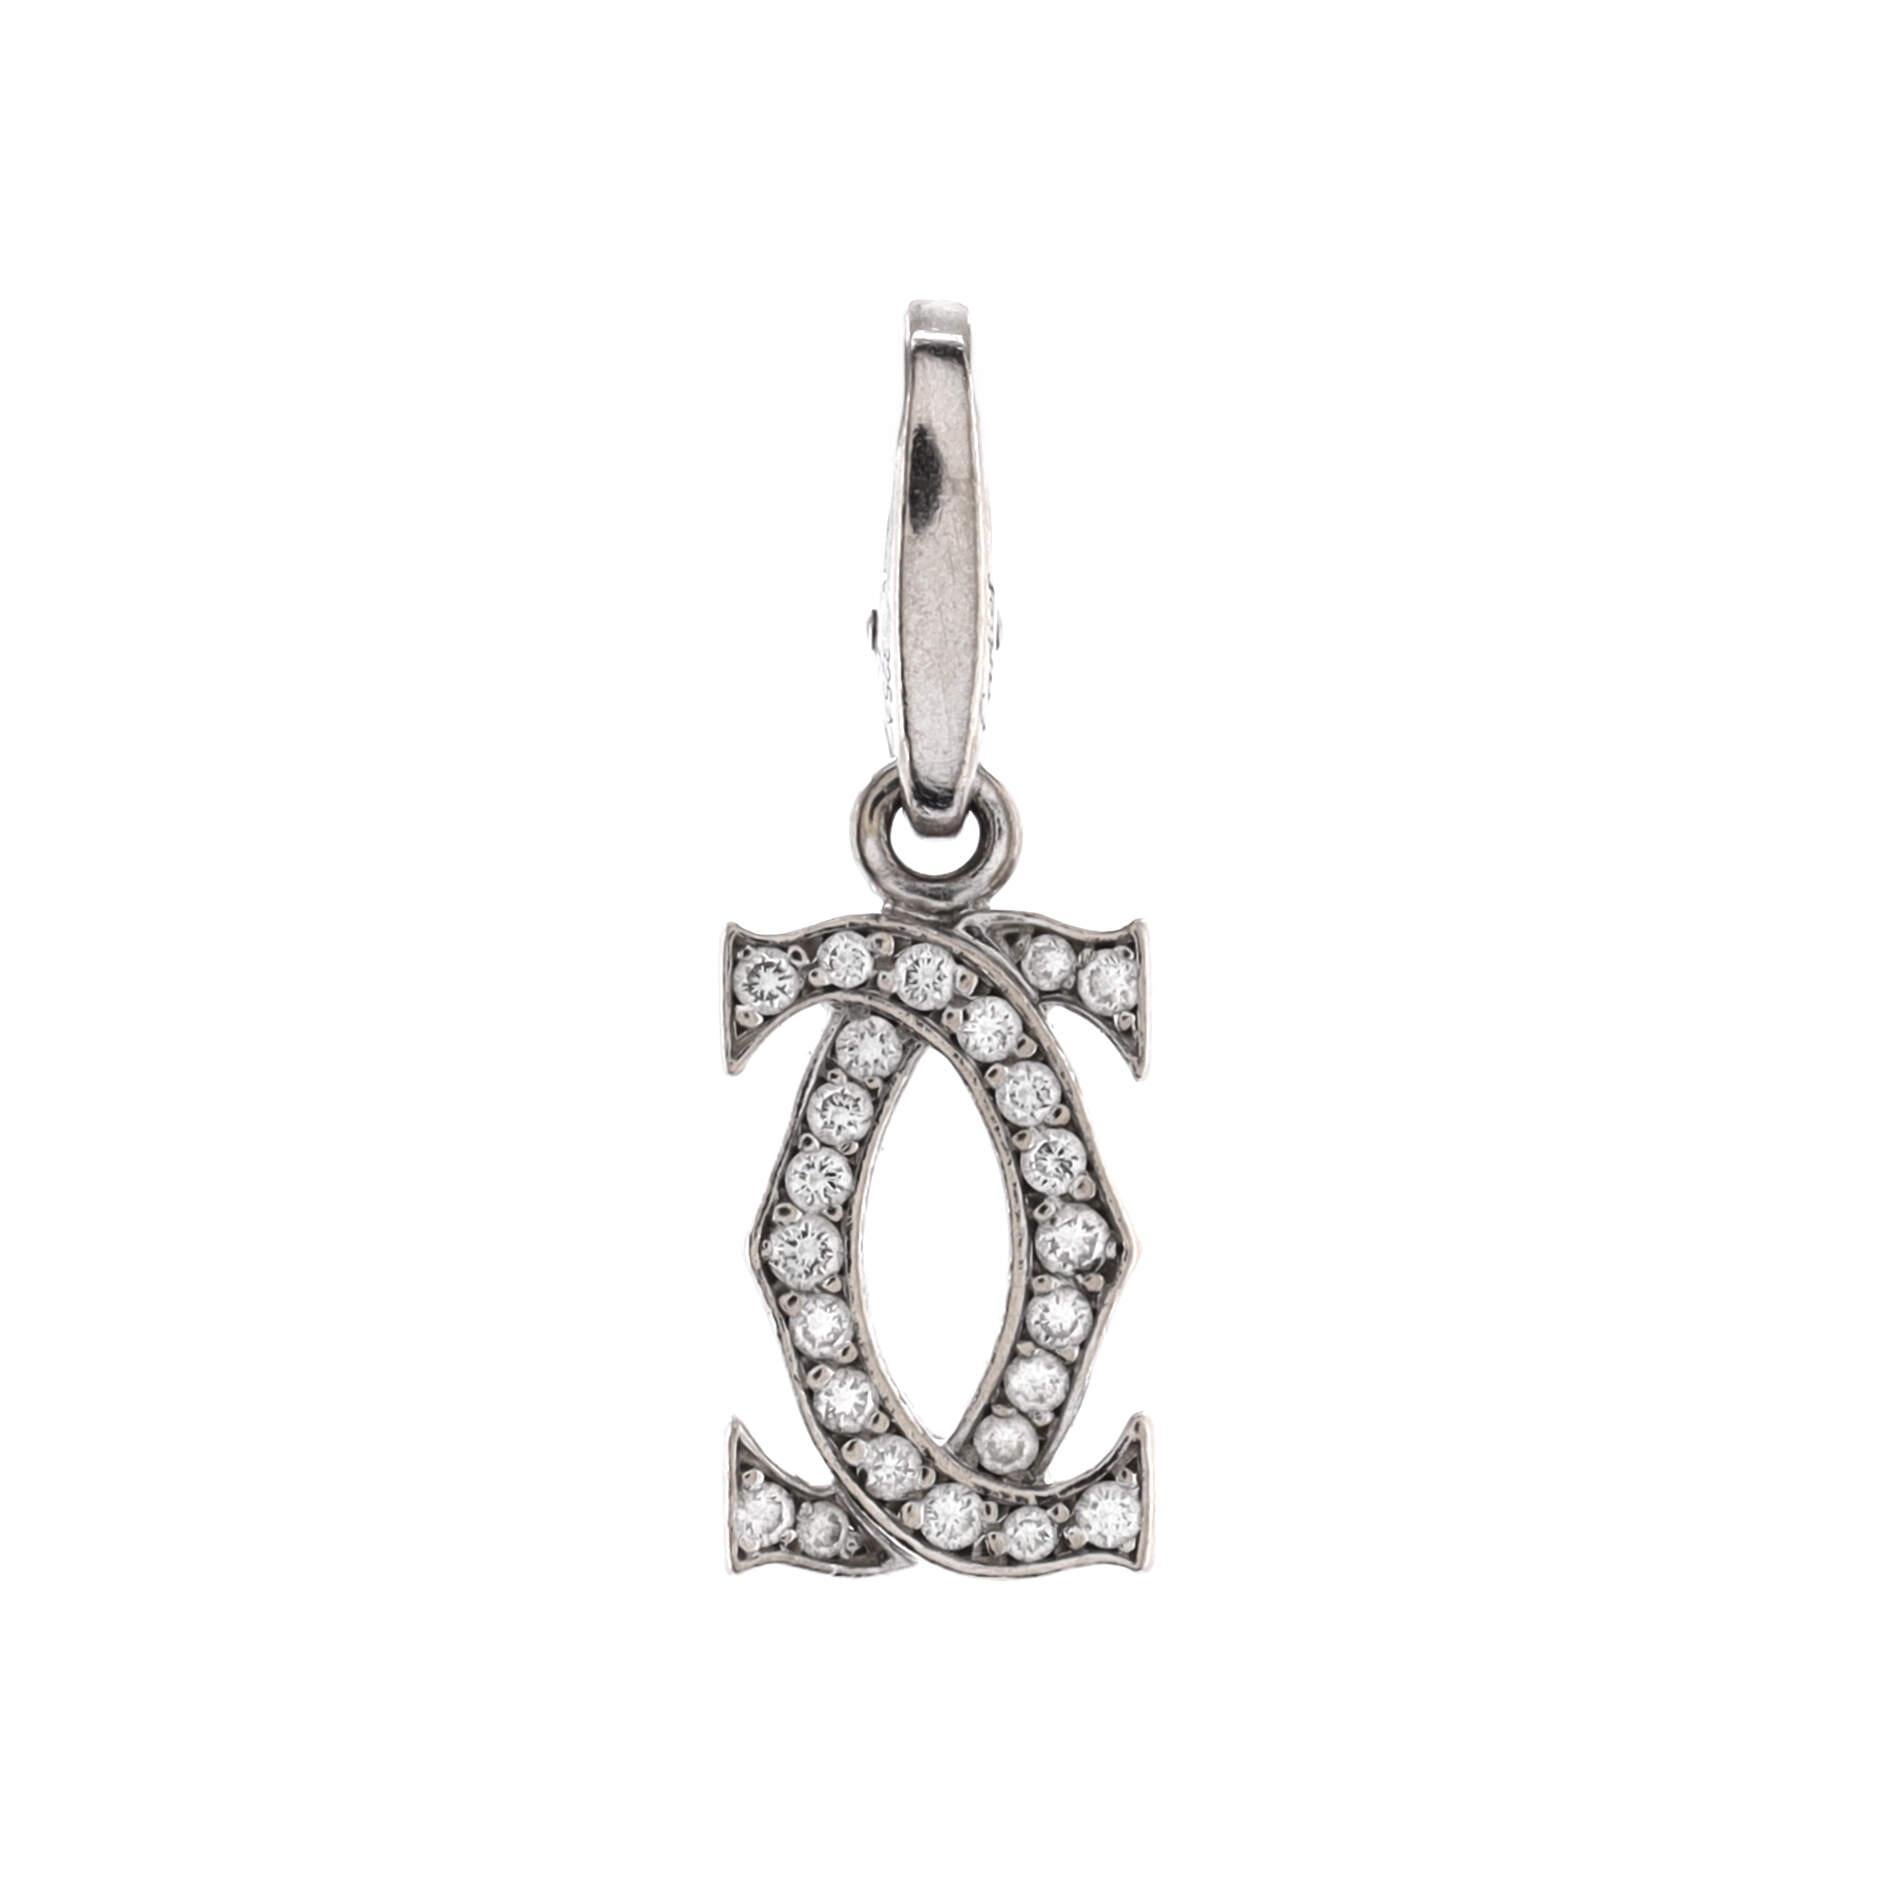 Condition: Good. Moderately heavy wear throughout.
Accessories: No Accessories
Measurements: Height/Length: 25.20 mm, Width: 8.75 mm
Designer: Cartier
Model: Double C Charm Pendant Pendant & Charms 18K White Gold with Diamonds
Exterior Color: